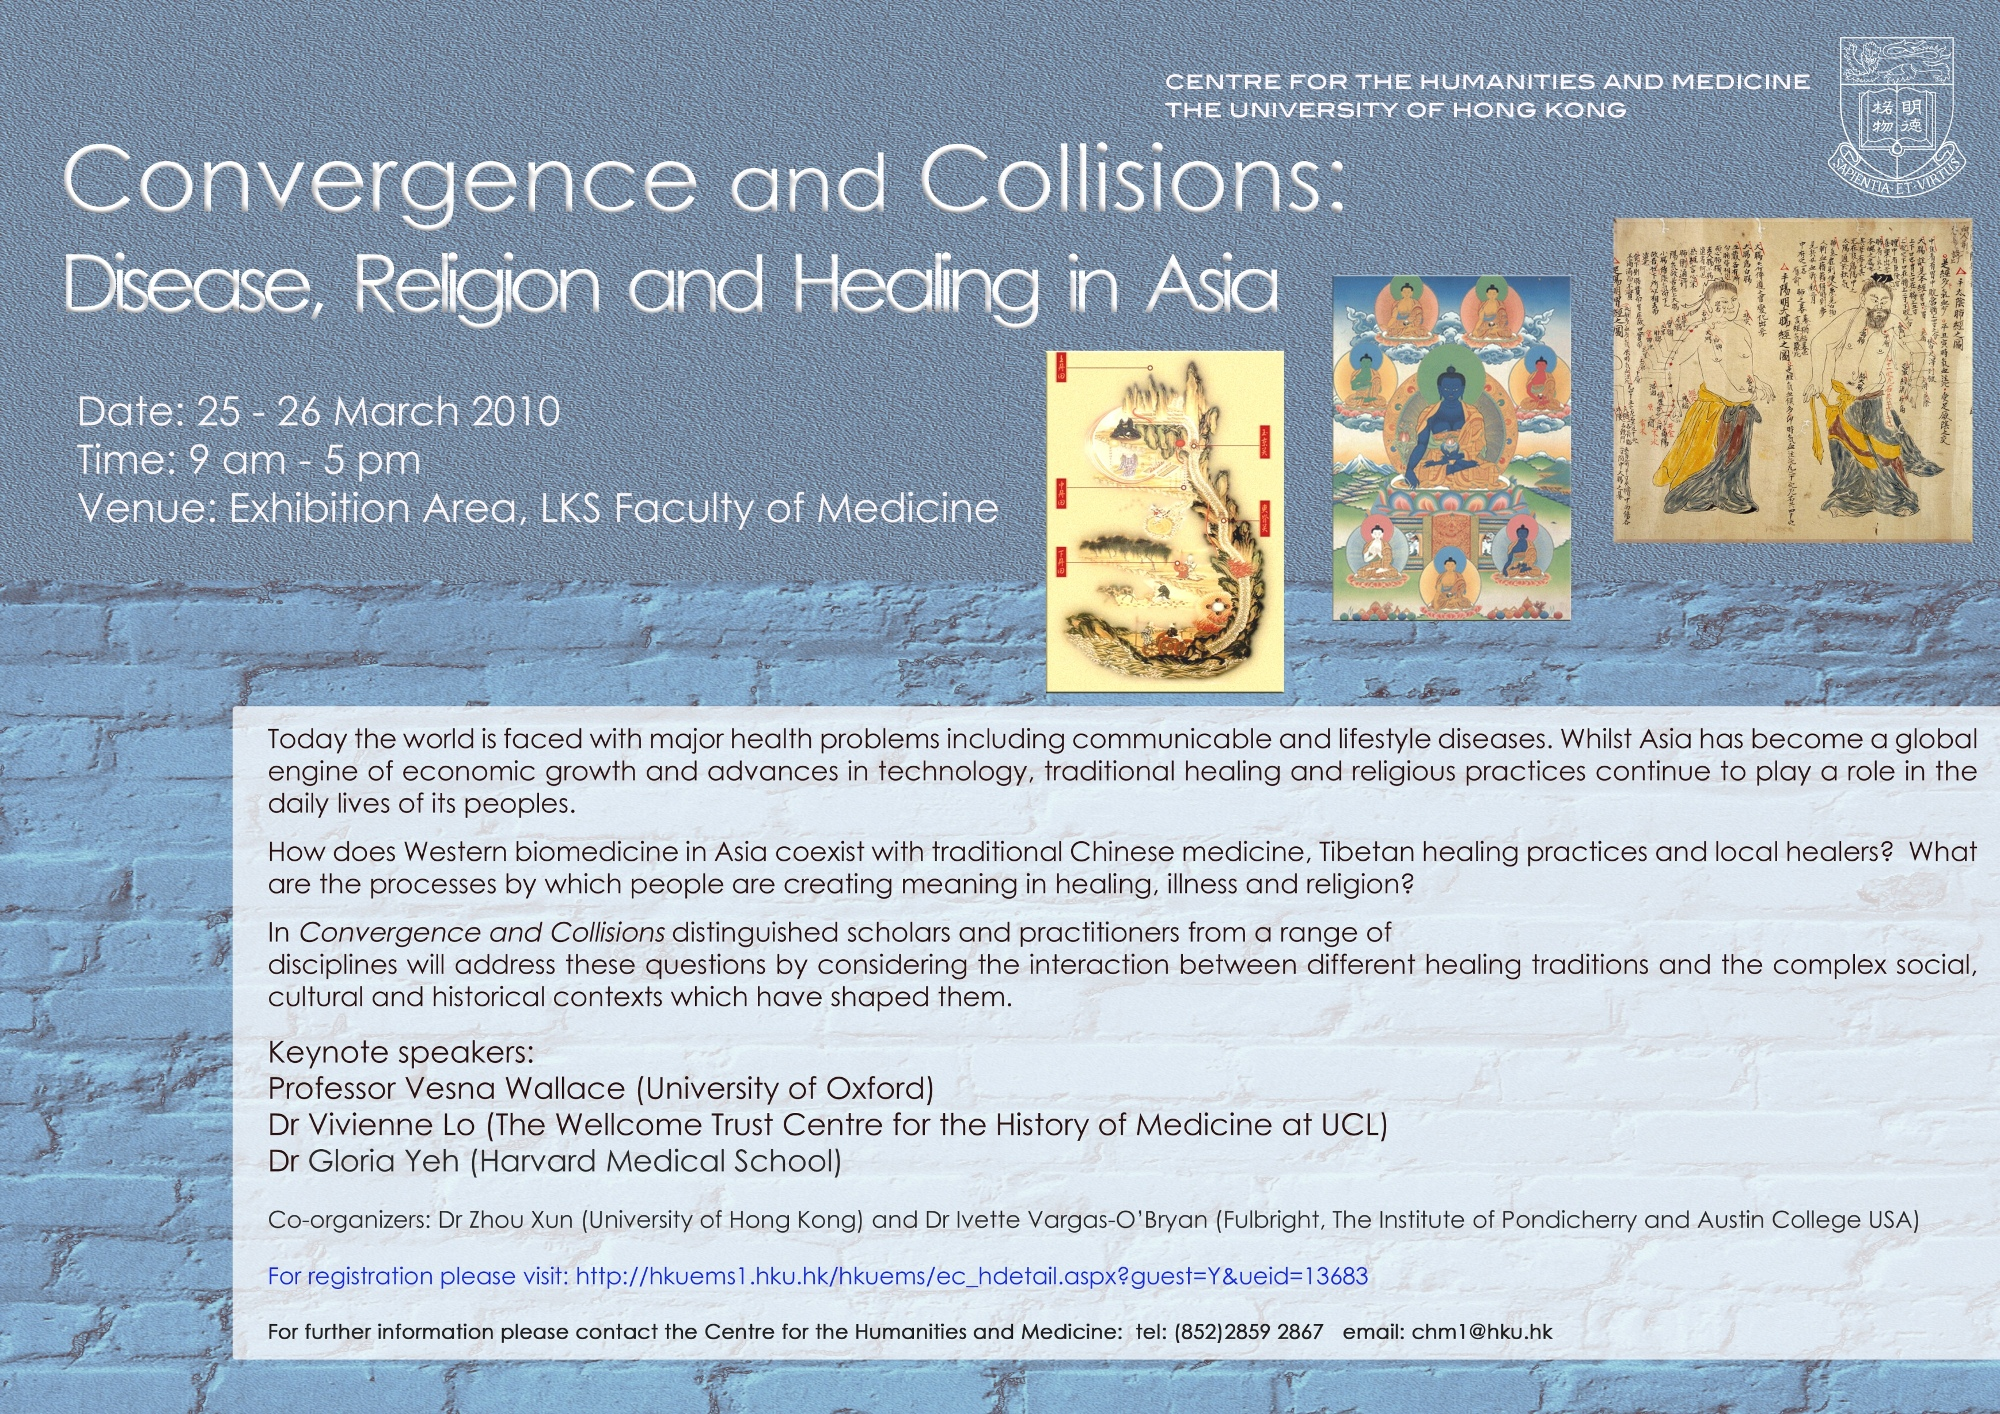 Convergence and Collisions: Disease, Religion and Healing